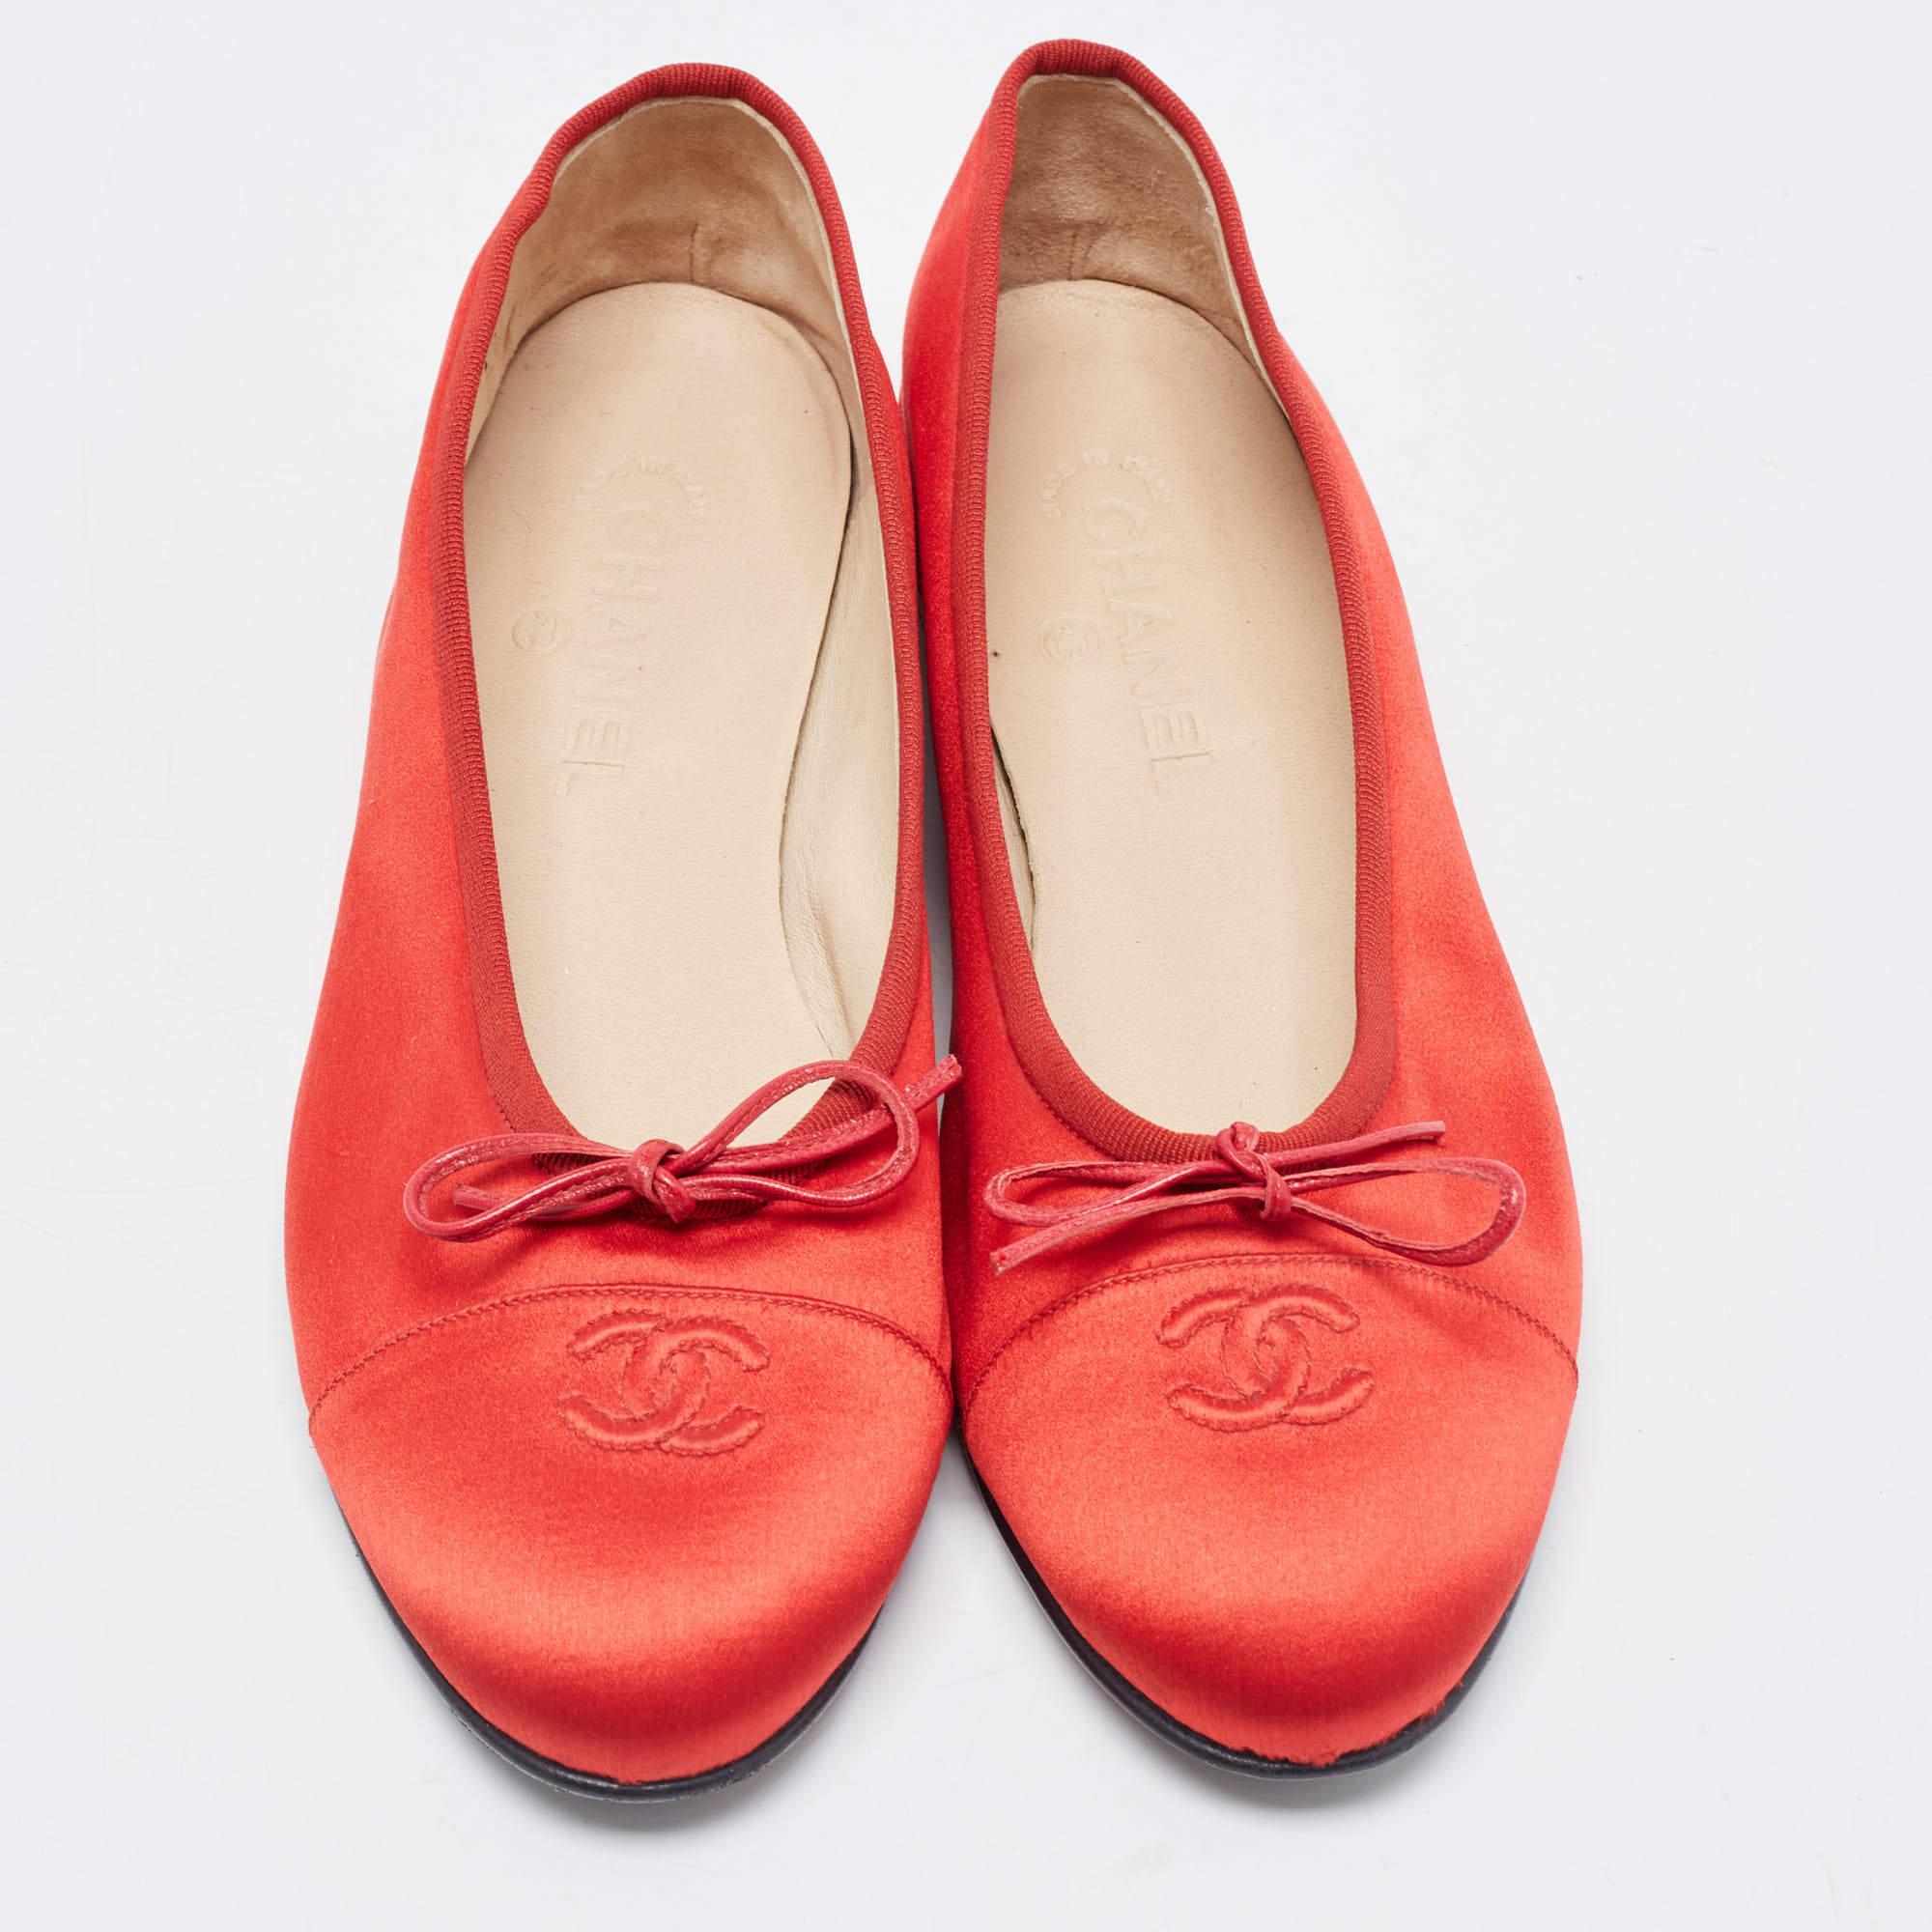 Red Chanel Ballet Flat - 3 For Sale on 1stDibs  red chanel.flats, chanel  red tweed ballet flats, chanel flats red